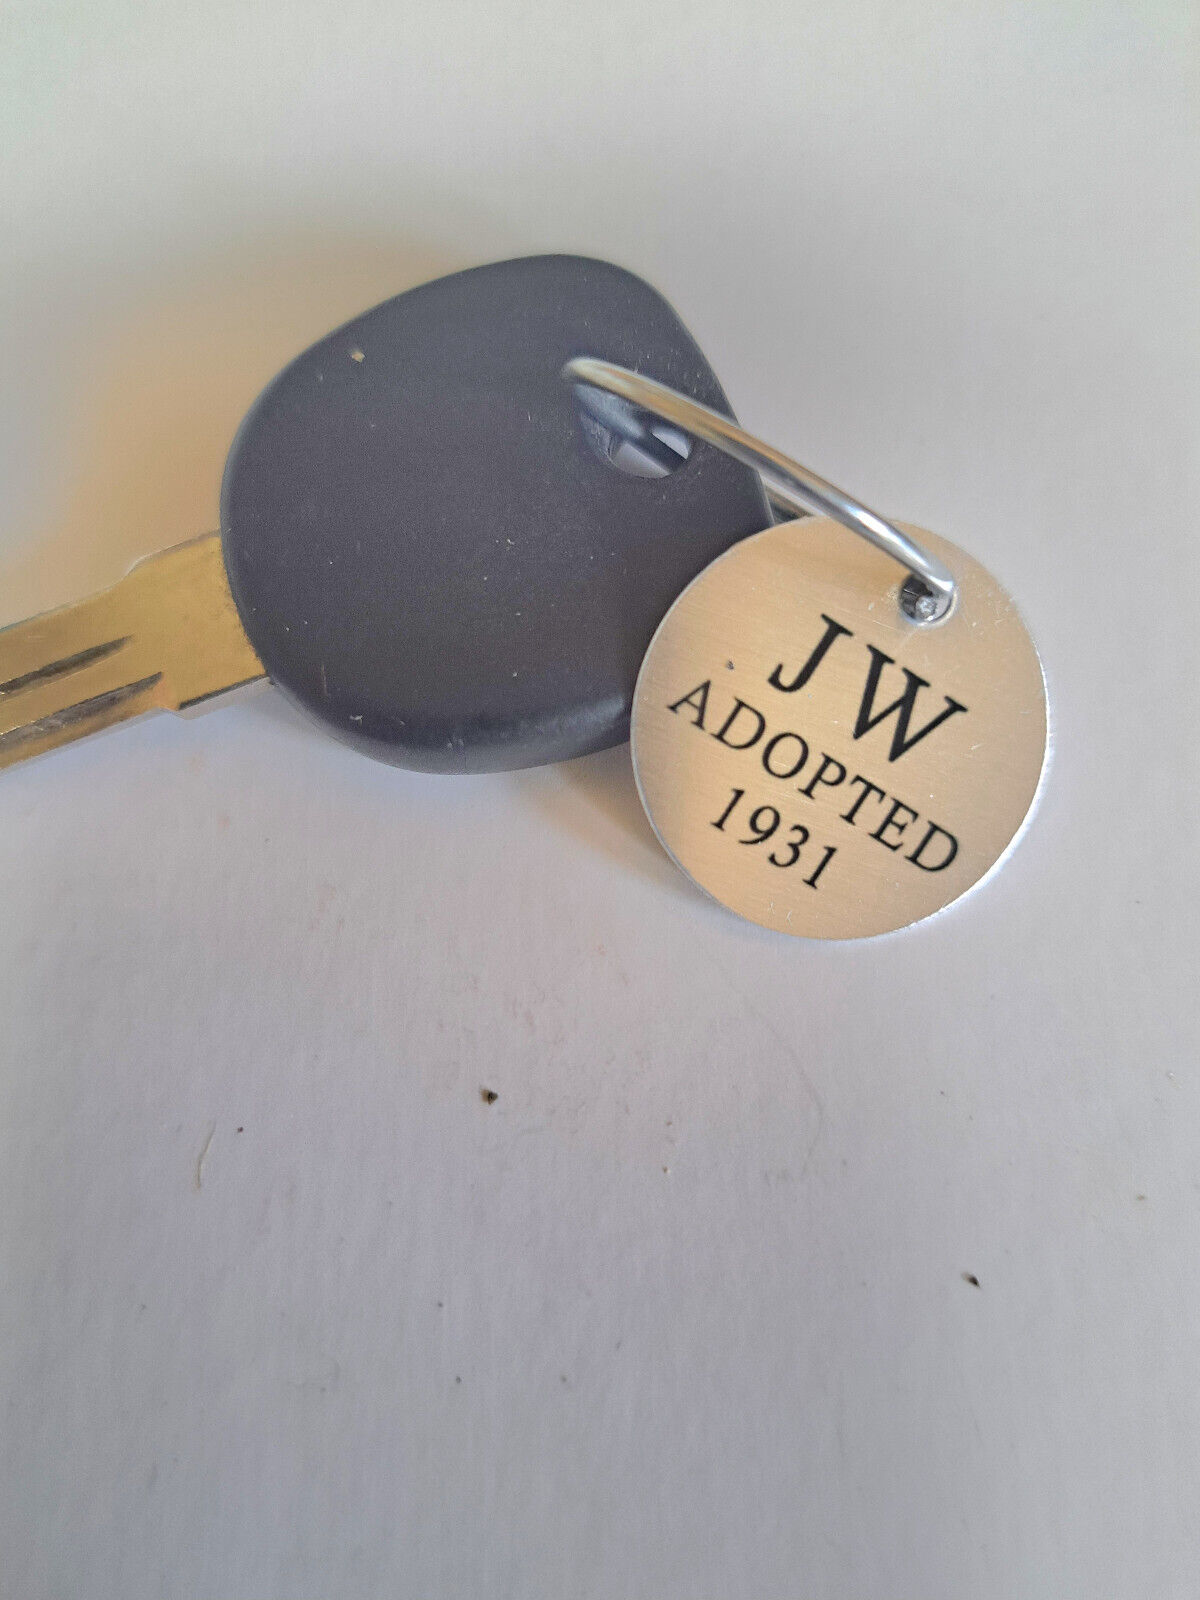   STAMPED JW ADOPTED 1931 THE YEAR JW WAS ADOPTED/ SILVER COLORED KEY FOB